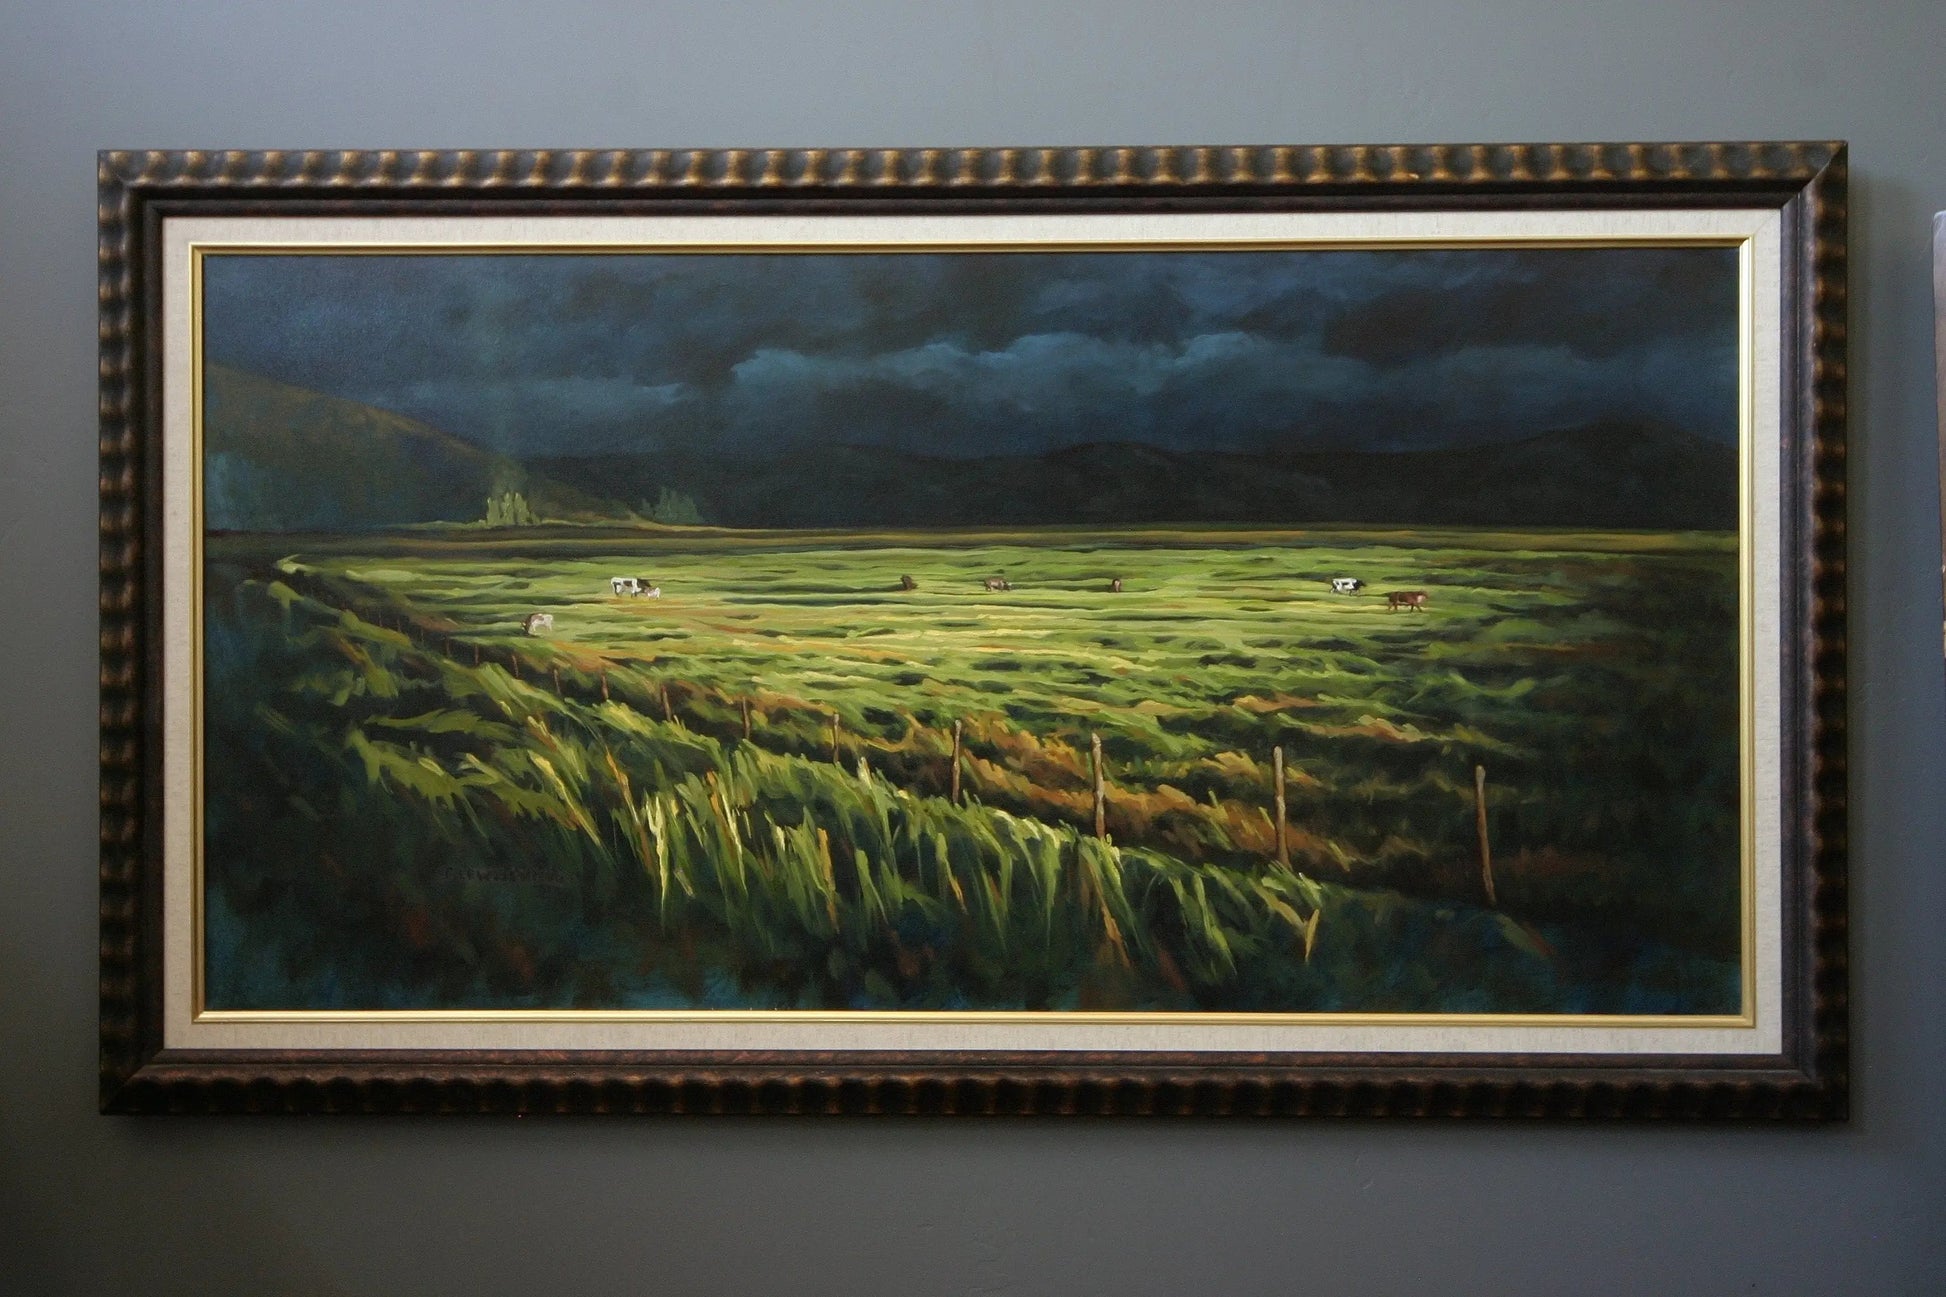 Landscape oil painting of beautiful Kamas valley after the rain. Painted by artist Tanya Pilling.